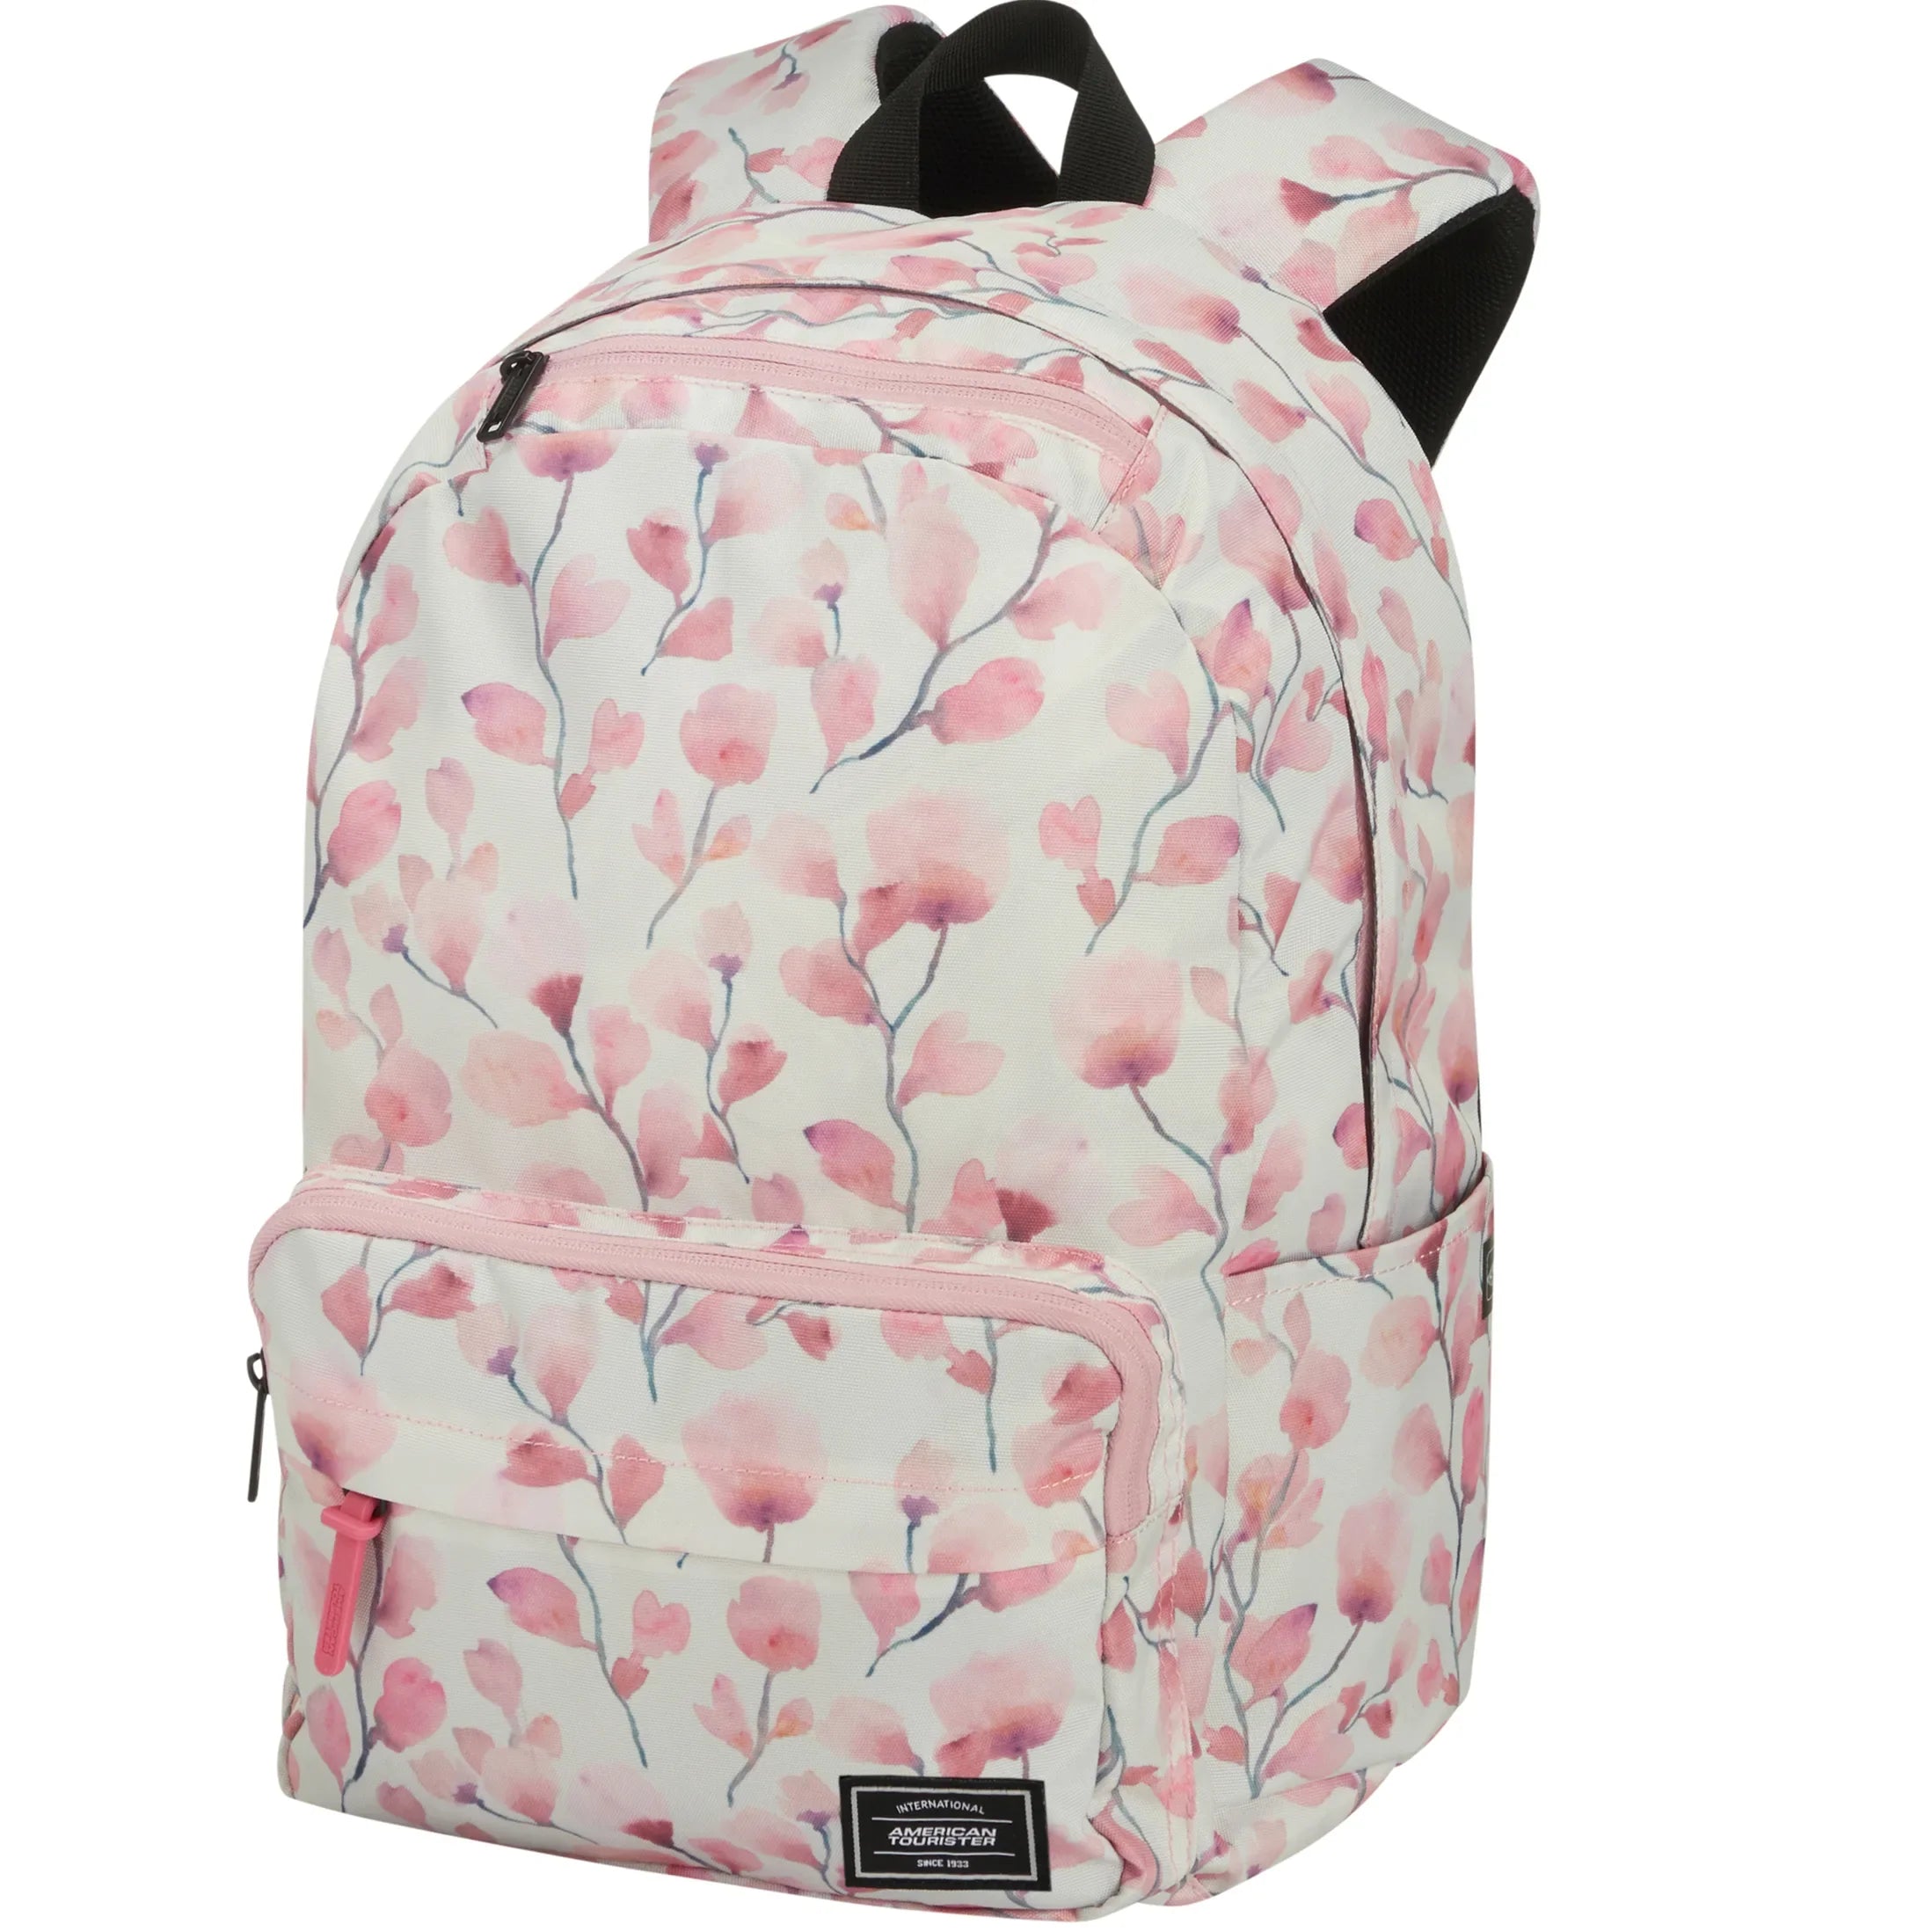 American Tourister Urban Groove Lifestyle Backpack 1 40 cm - blossom